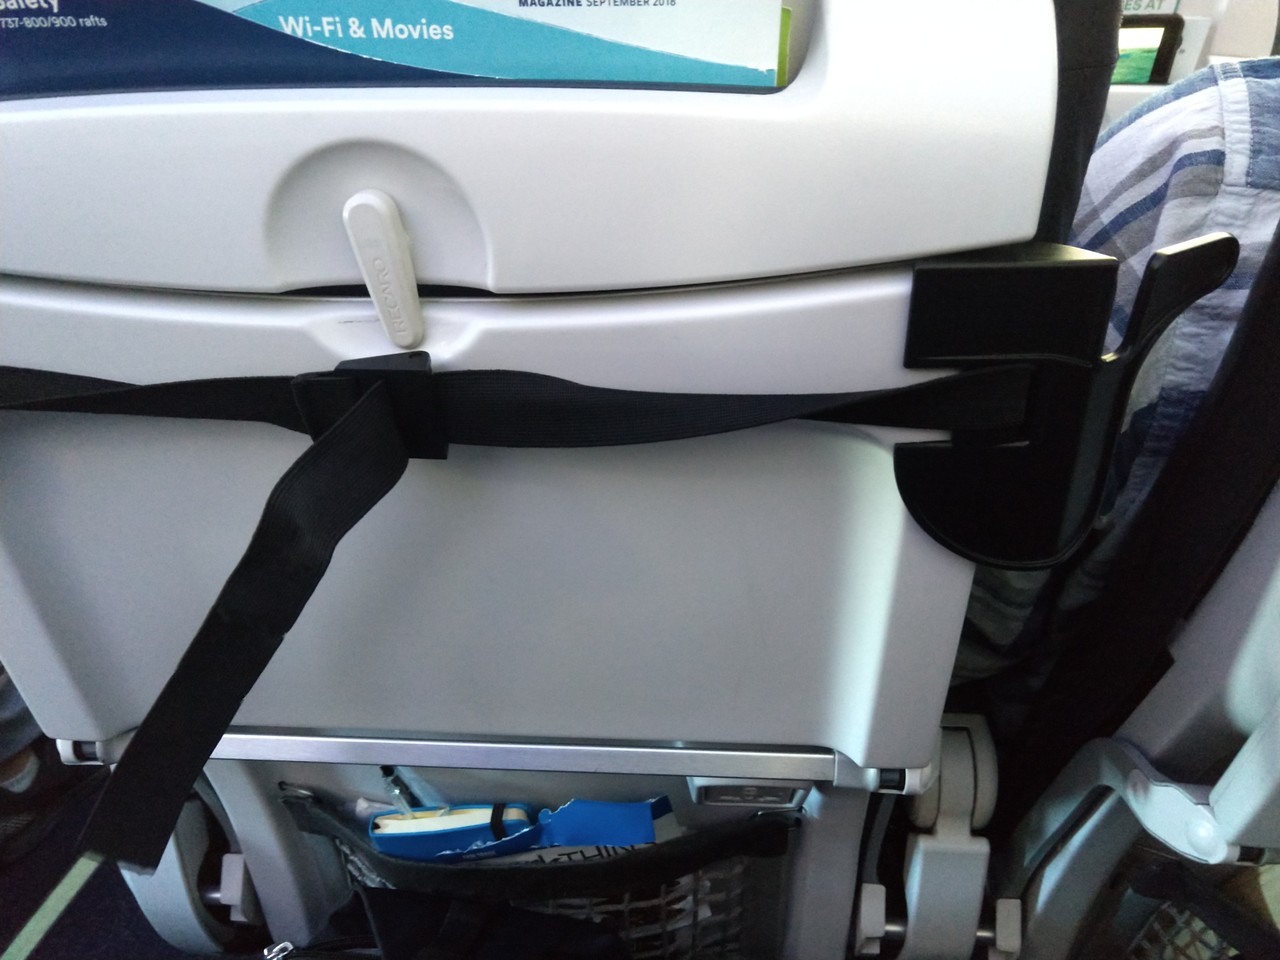 strap around tray table